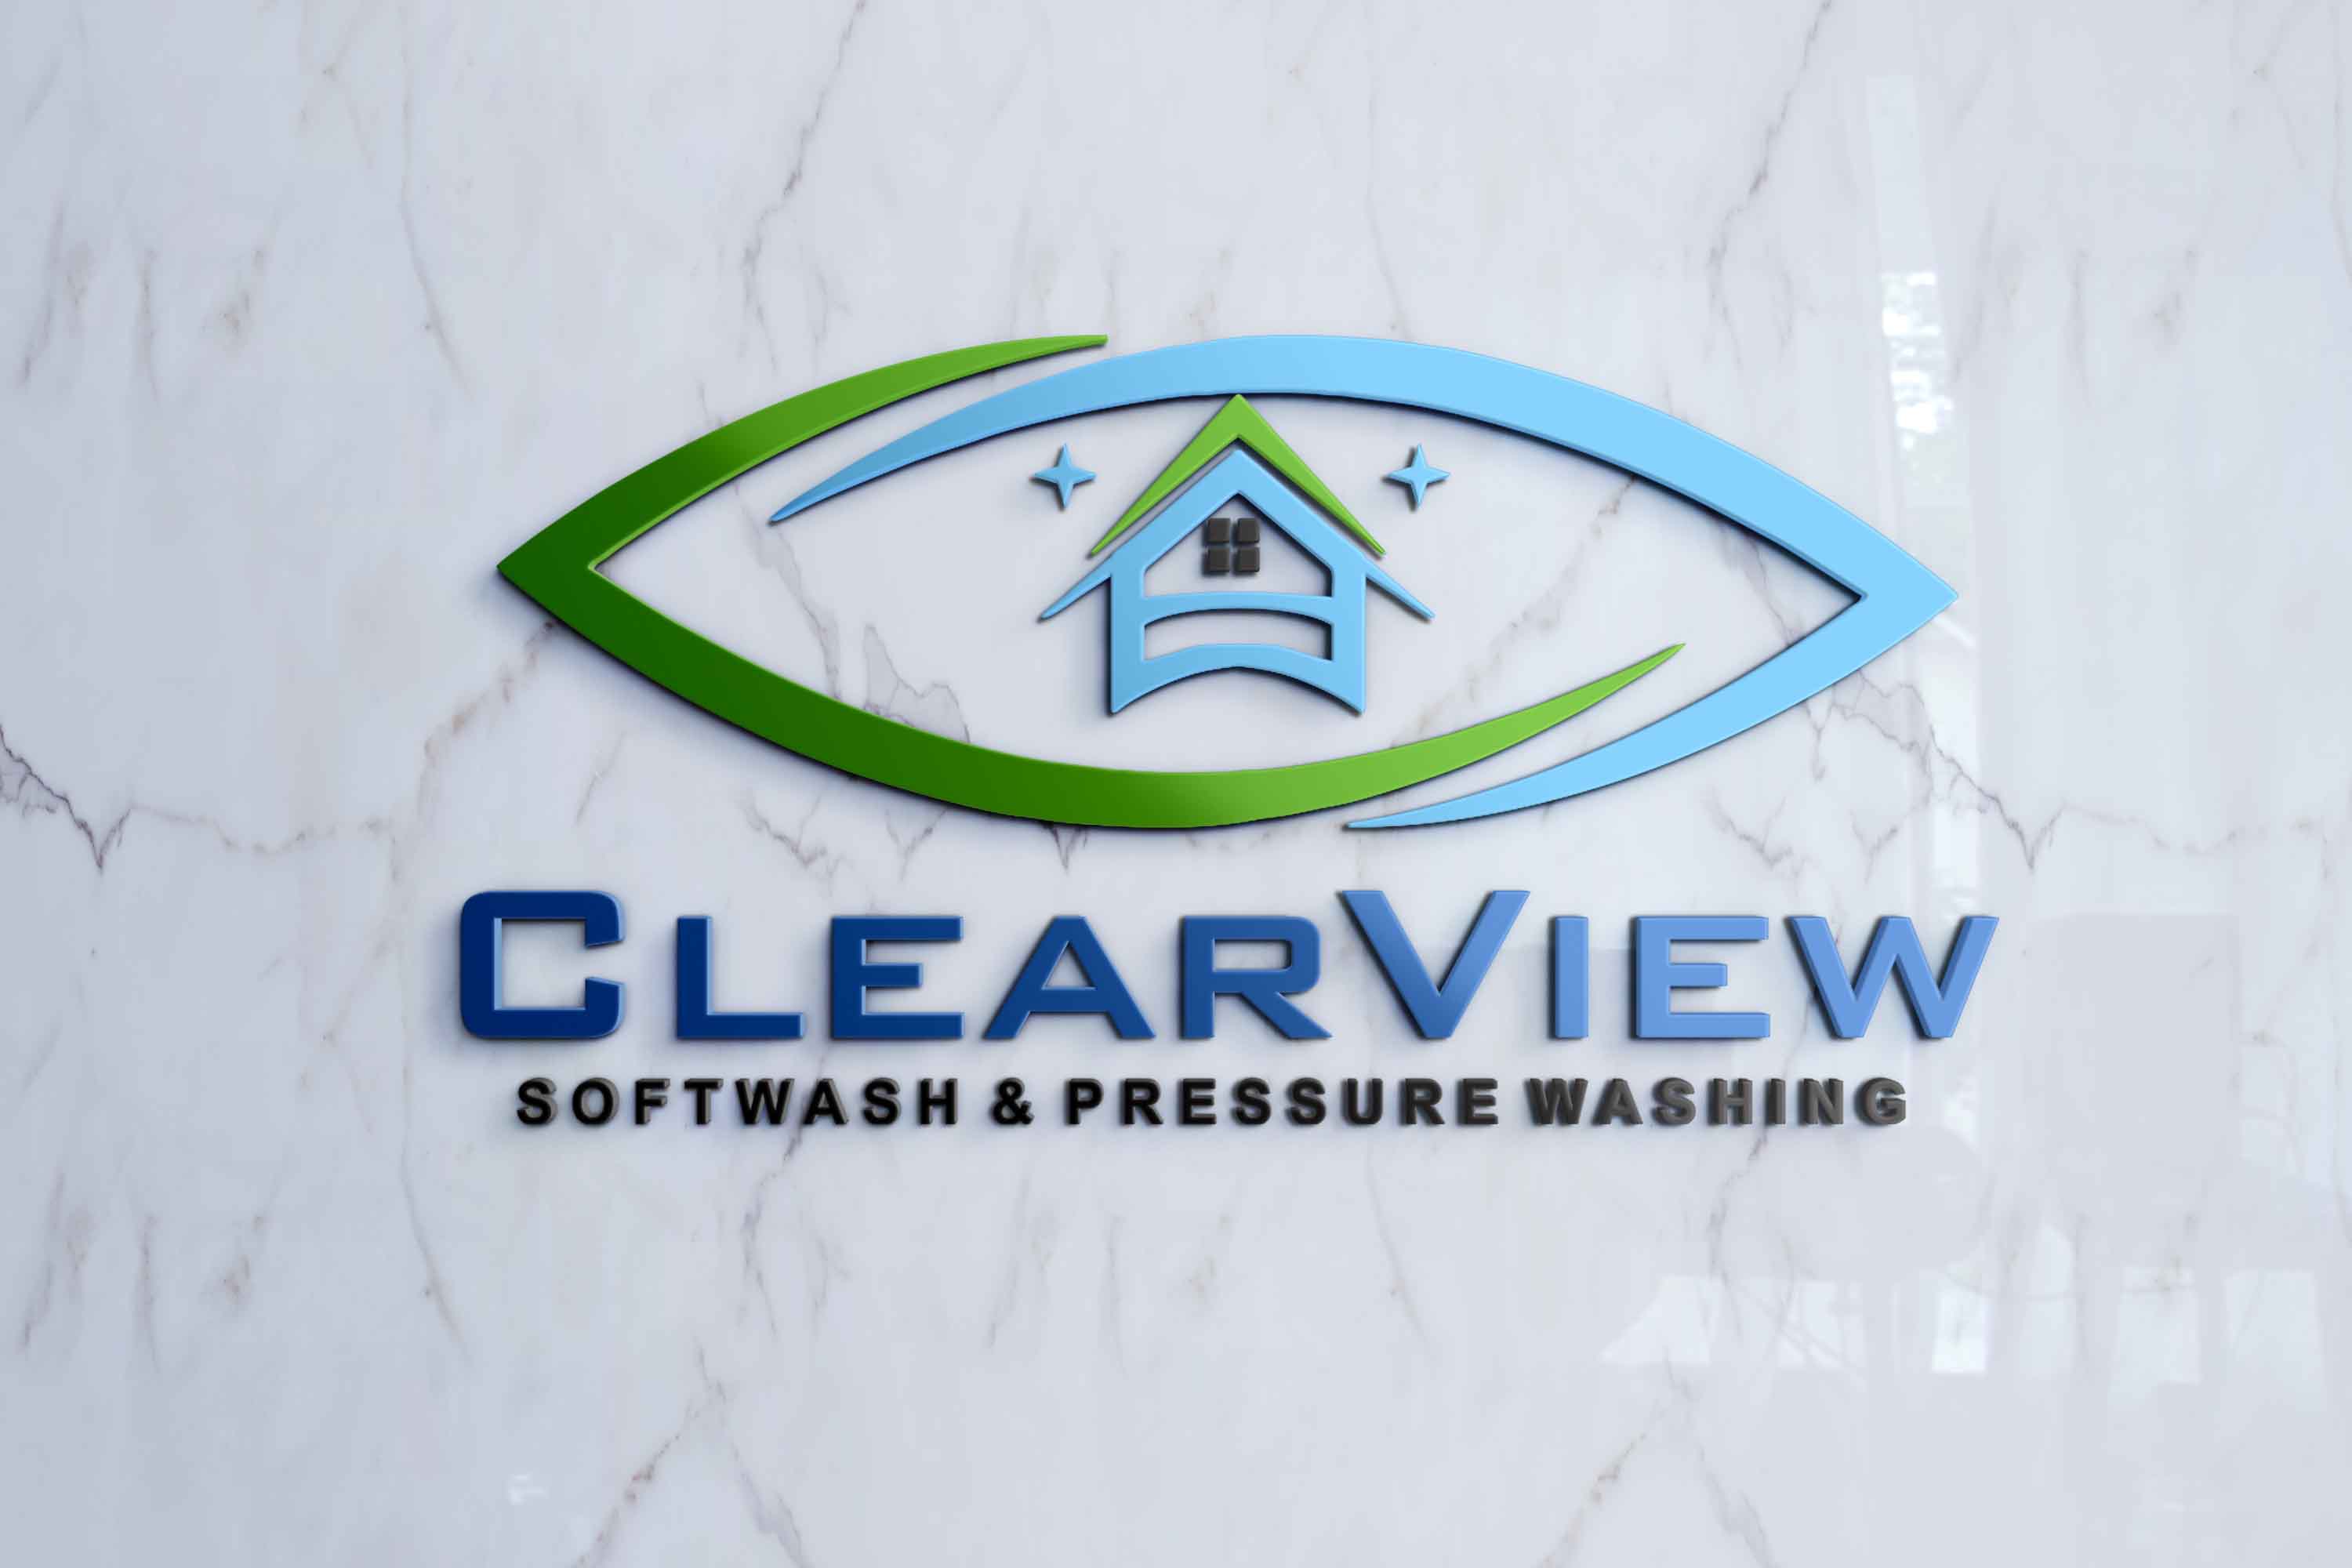 ClearView Softwash & Pressure Washing Logo